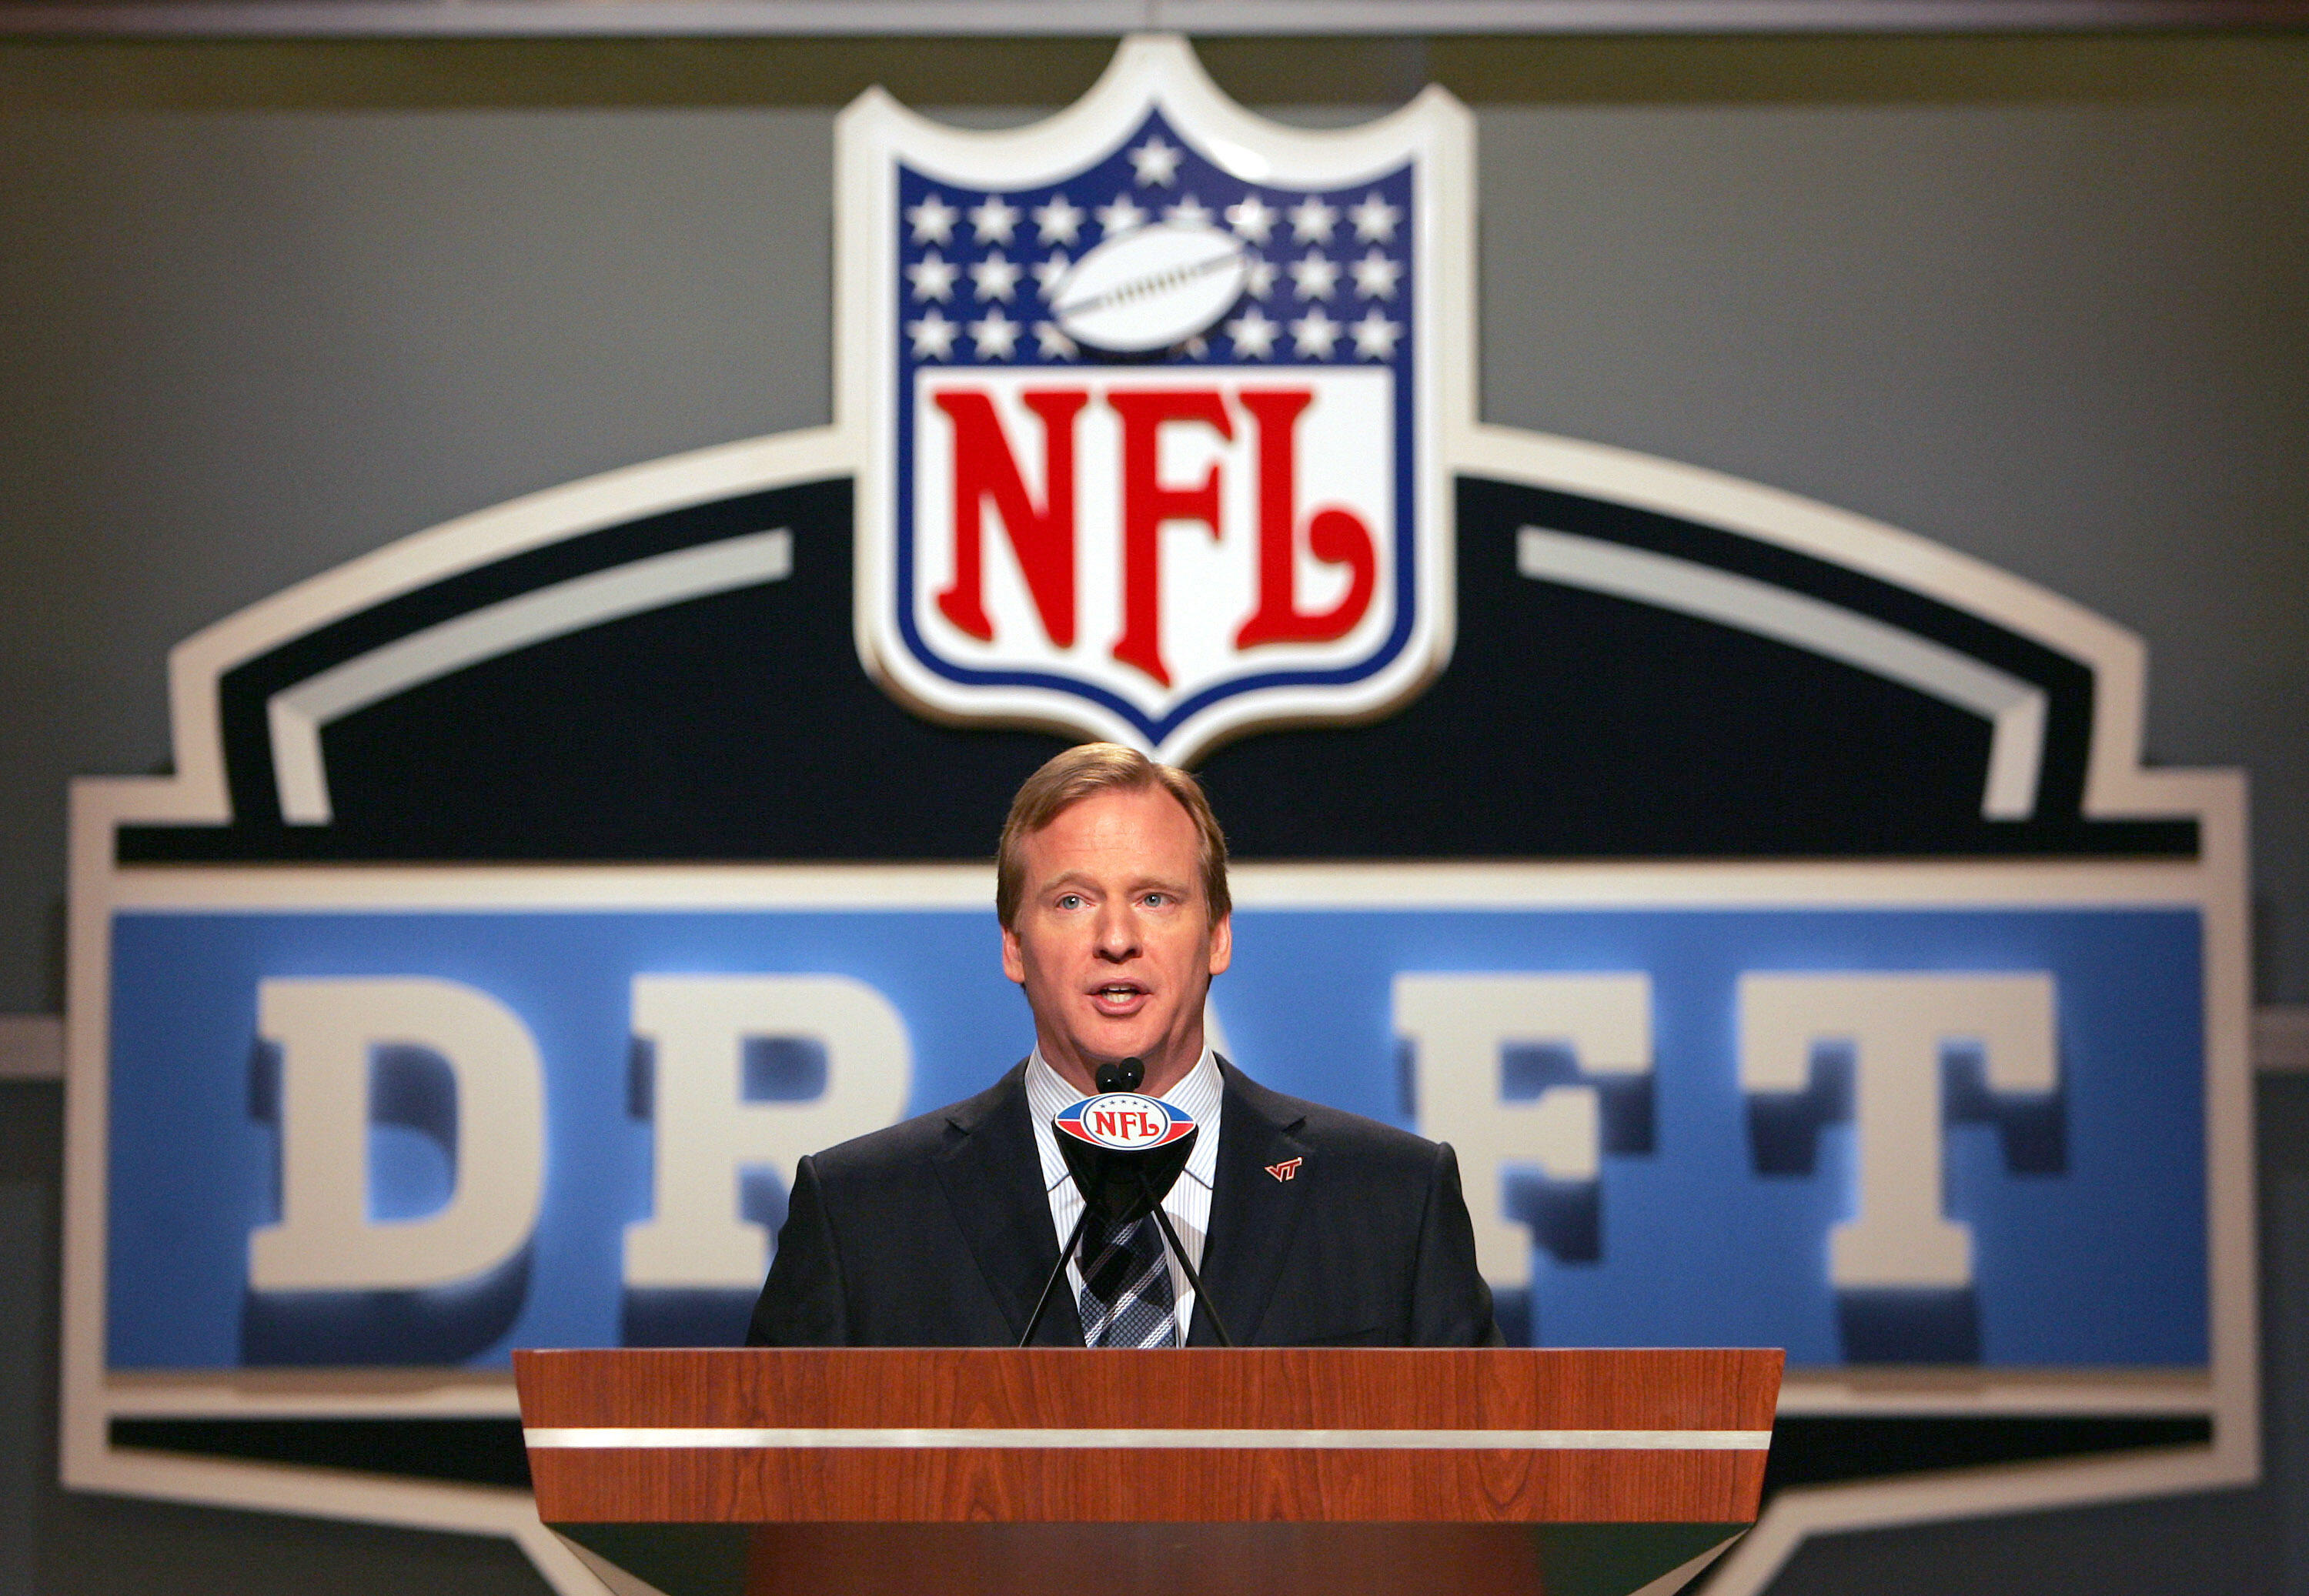 NFL Commissioner Roger Goodell during the NFL draft at Radio City Music Hall in New York, NY on Saturday, April 28, 2007. (Photo by Richard Schultz/NFLPhotoLibrary)